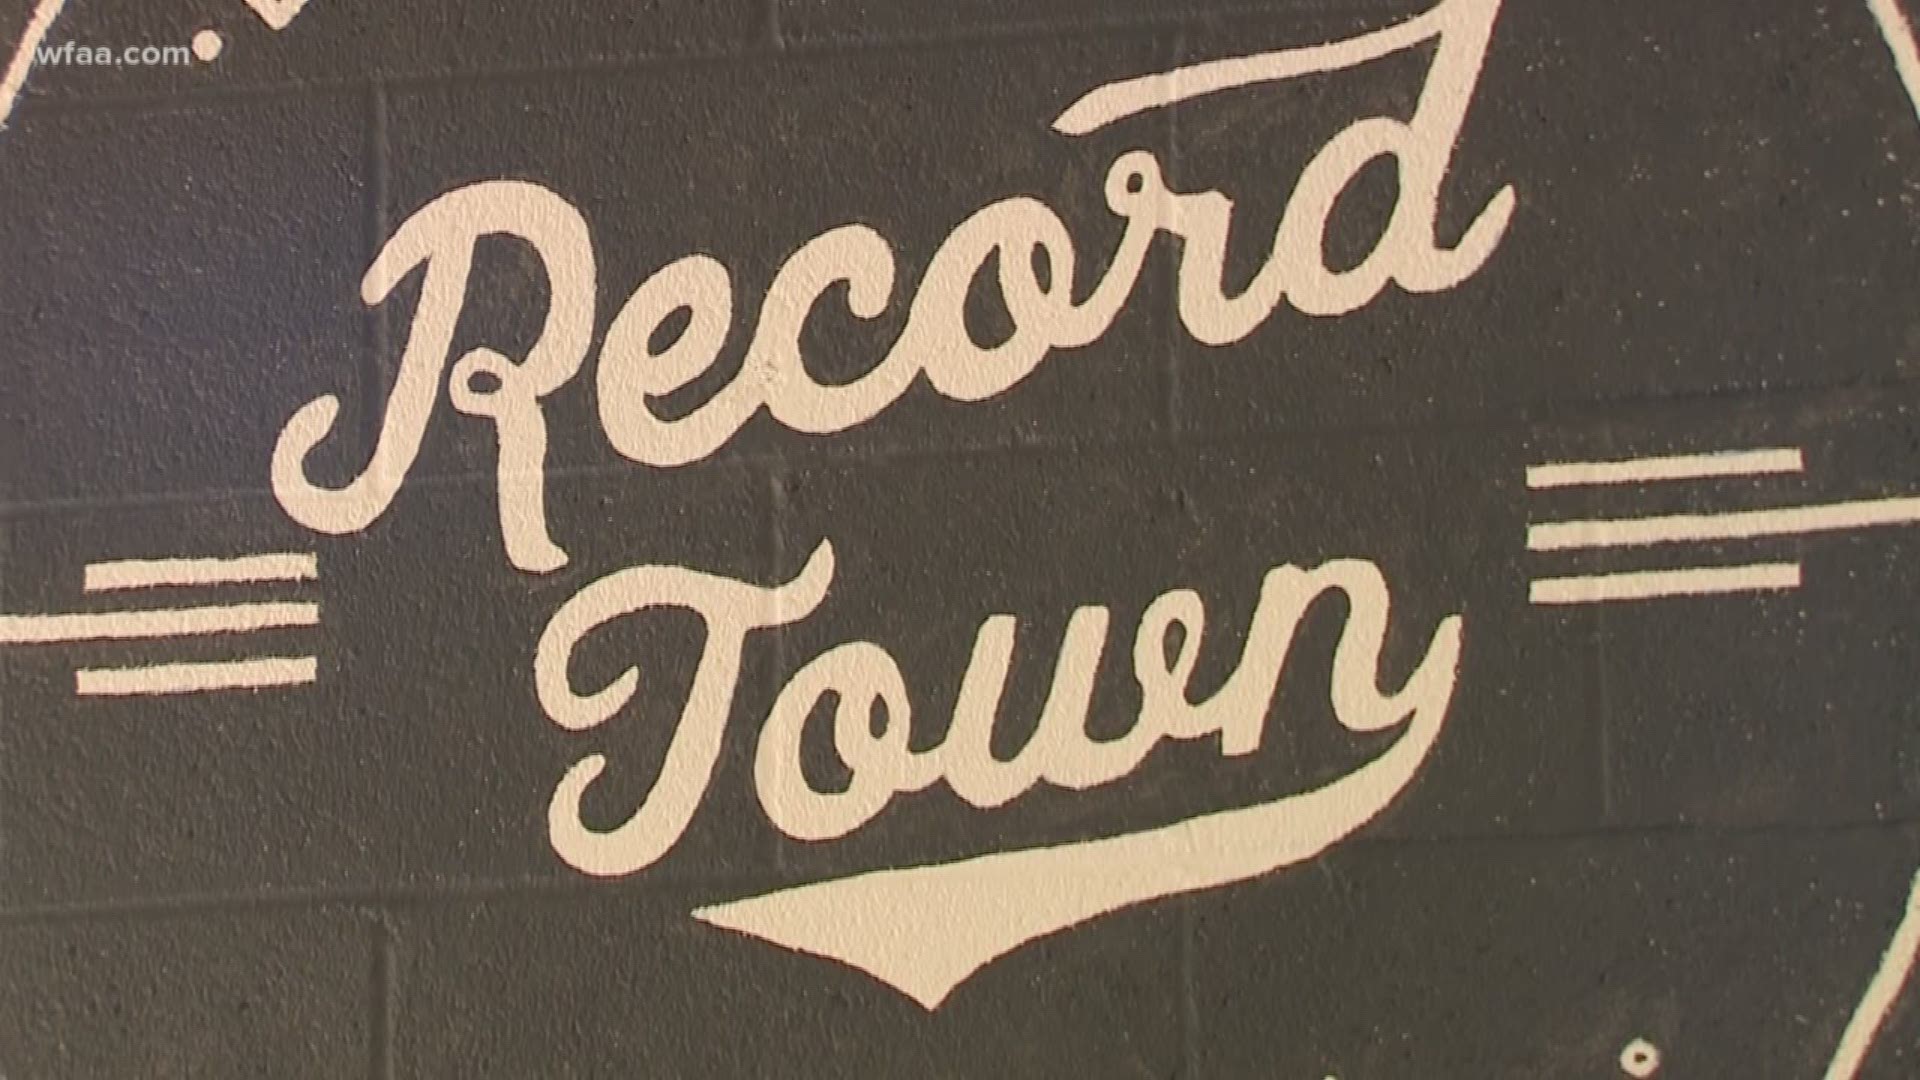 The iconic record shop has a new home.